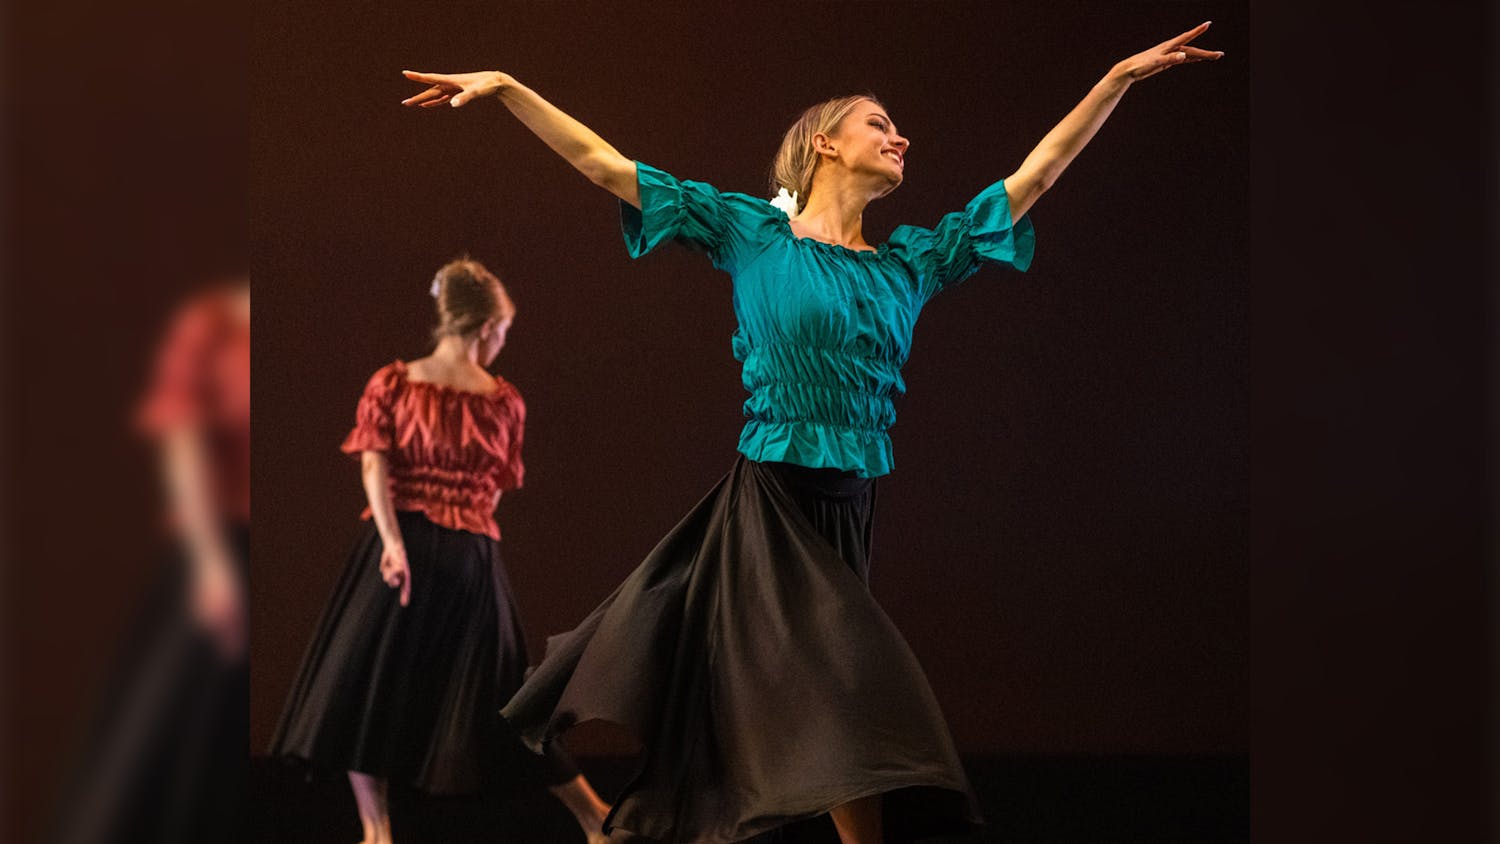 Student perform in "Adventure on the Horizon" by Jennifer Hanson for the spring 2023 Student Choreography Showcase. The performances for this semester's showcase will begin on Dec. 5 and continue through Dec. 8 at 7 p.m. each night in Drayton Hall Theatre.